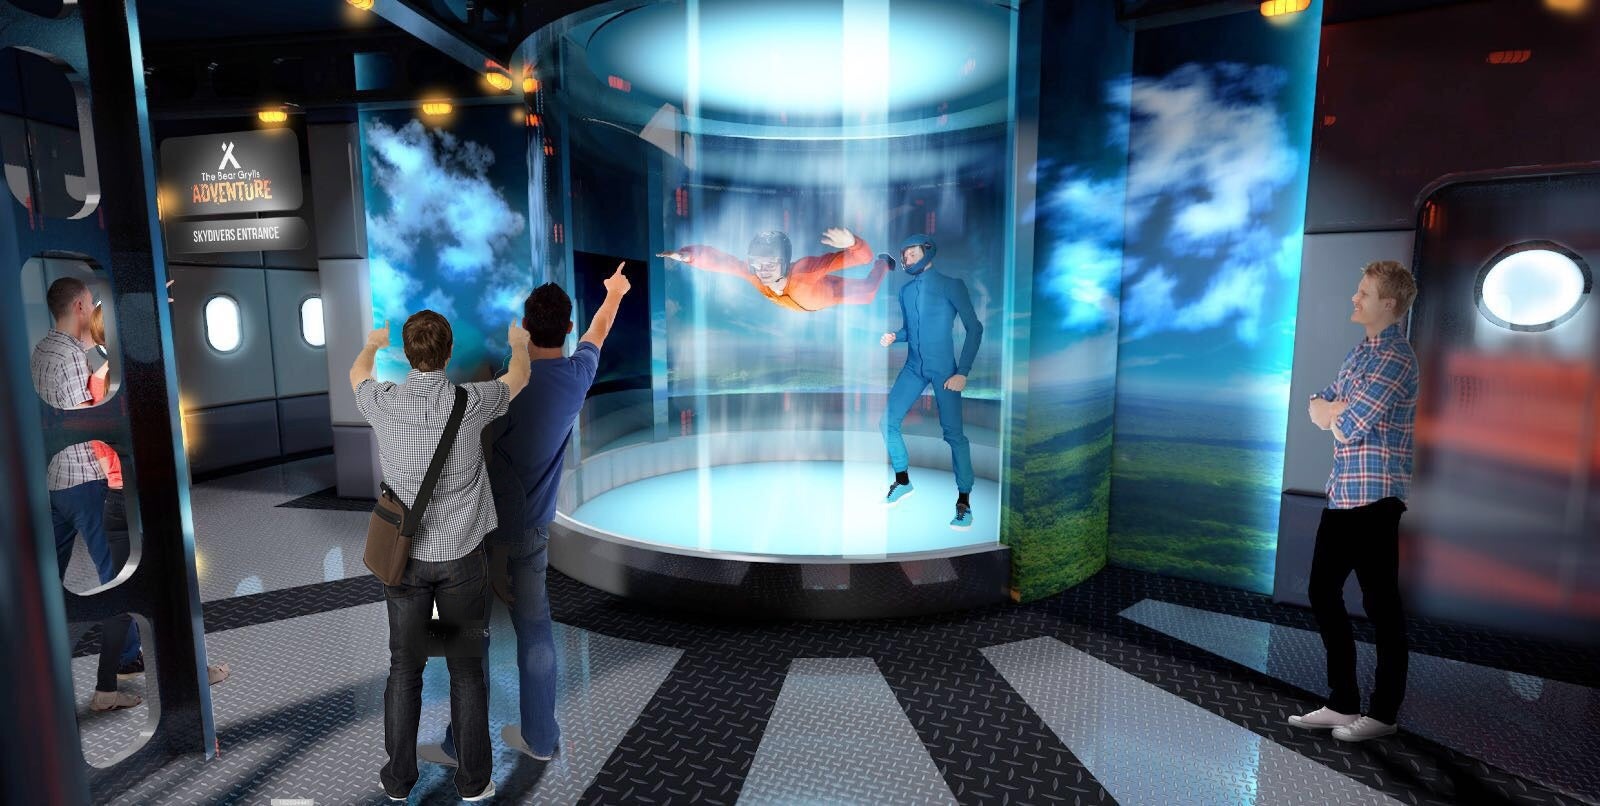 The attraction will have indoor skydiving